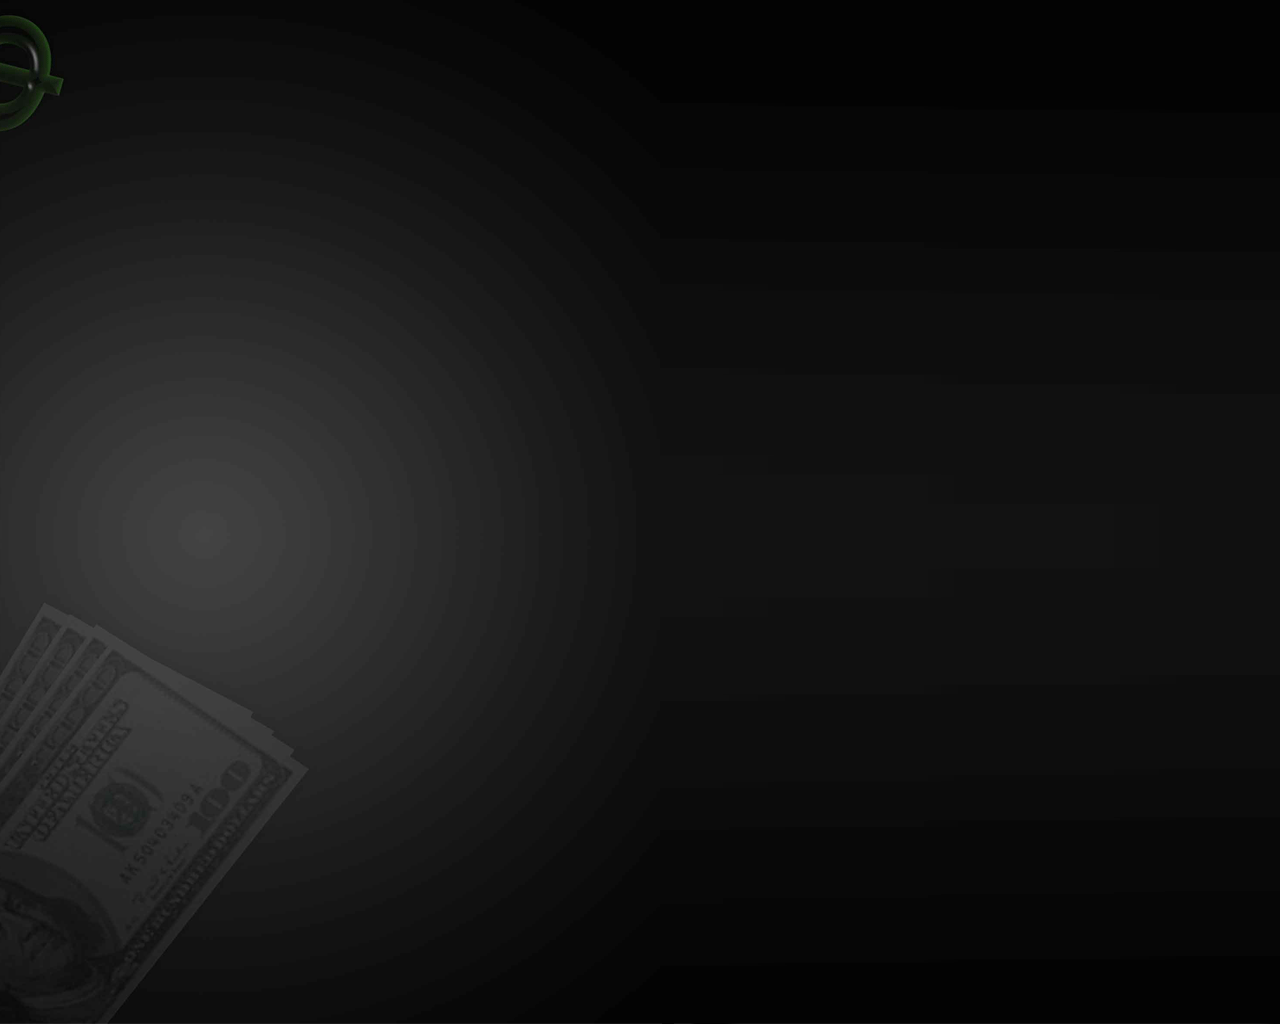 Free Money On Black Abstract Background For PowerPoint